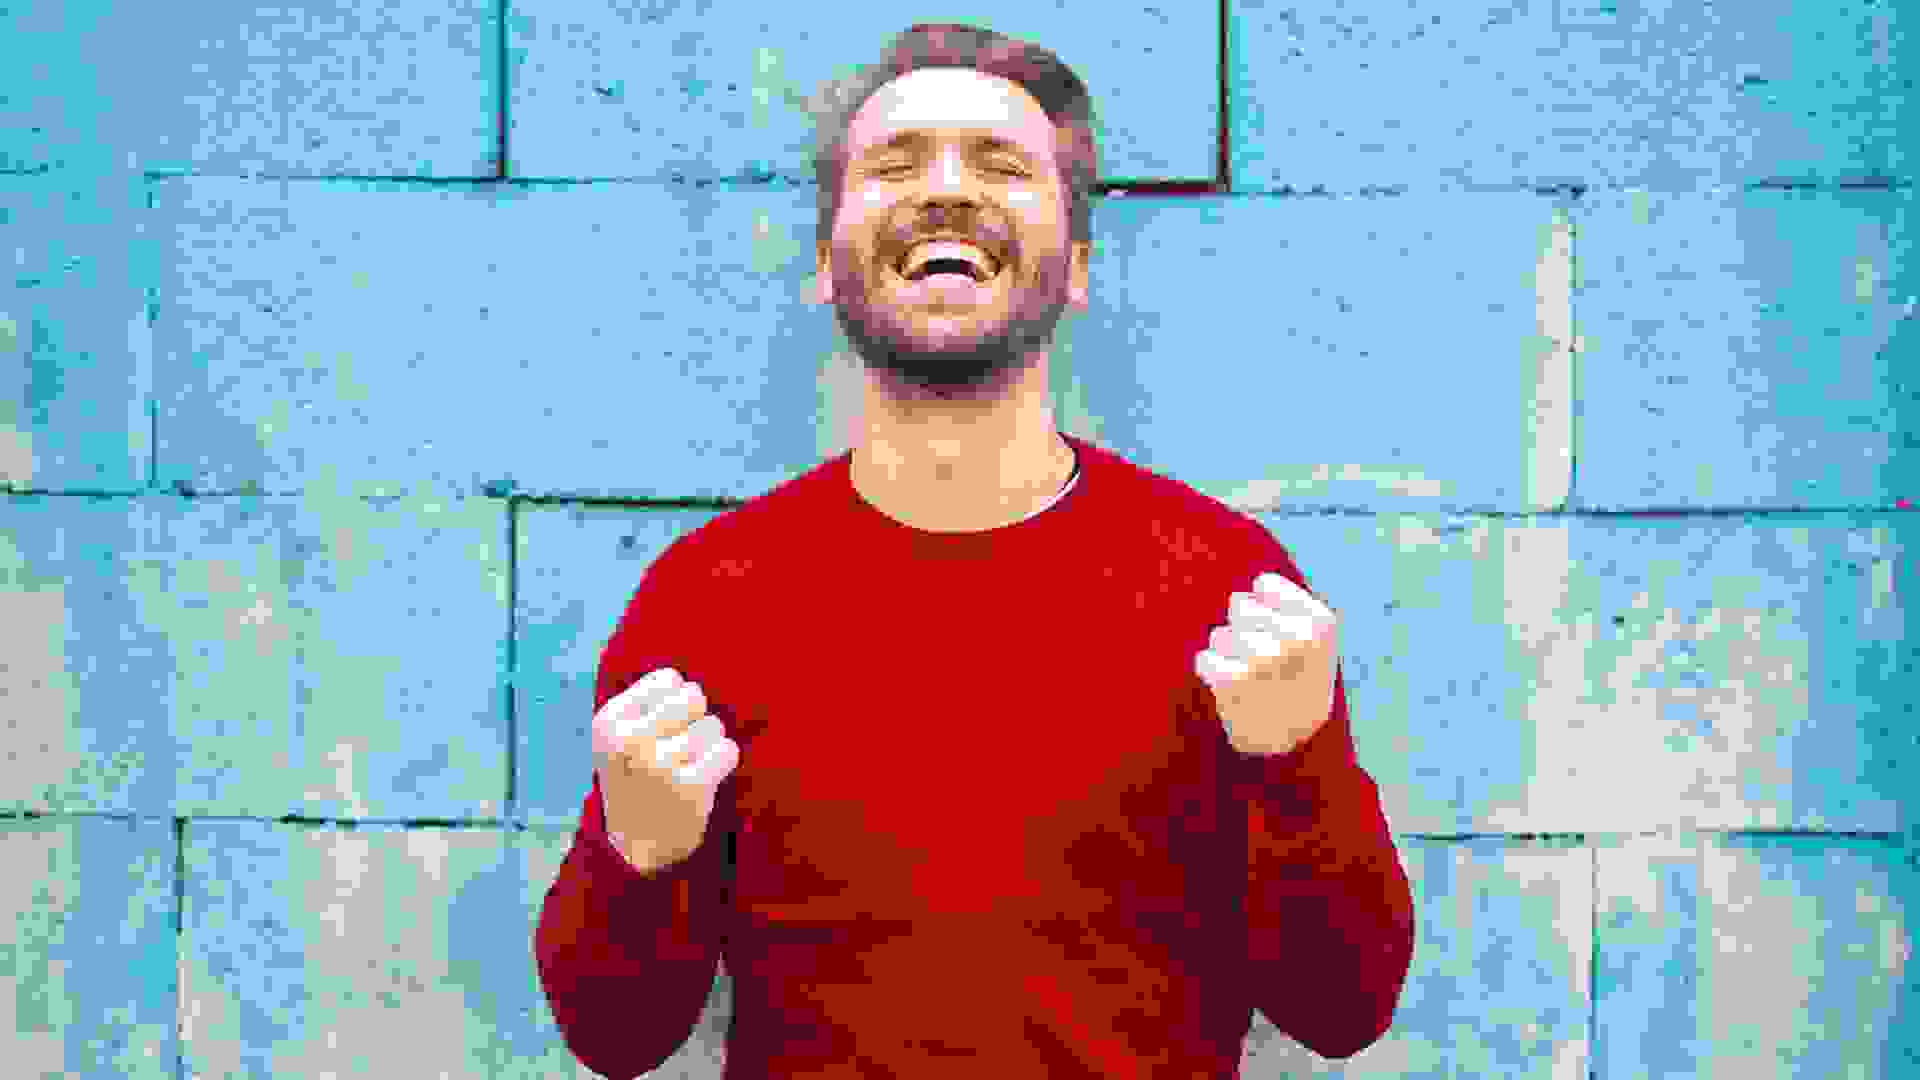 Smiling man in red sweater against blue wall making happy victorious gesture